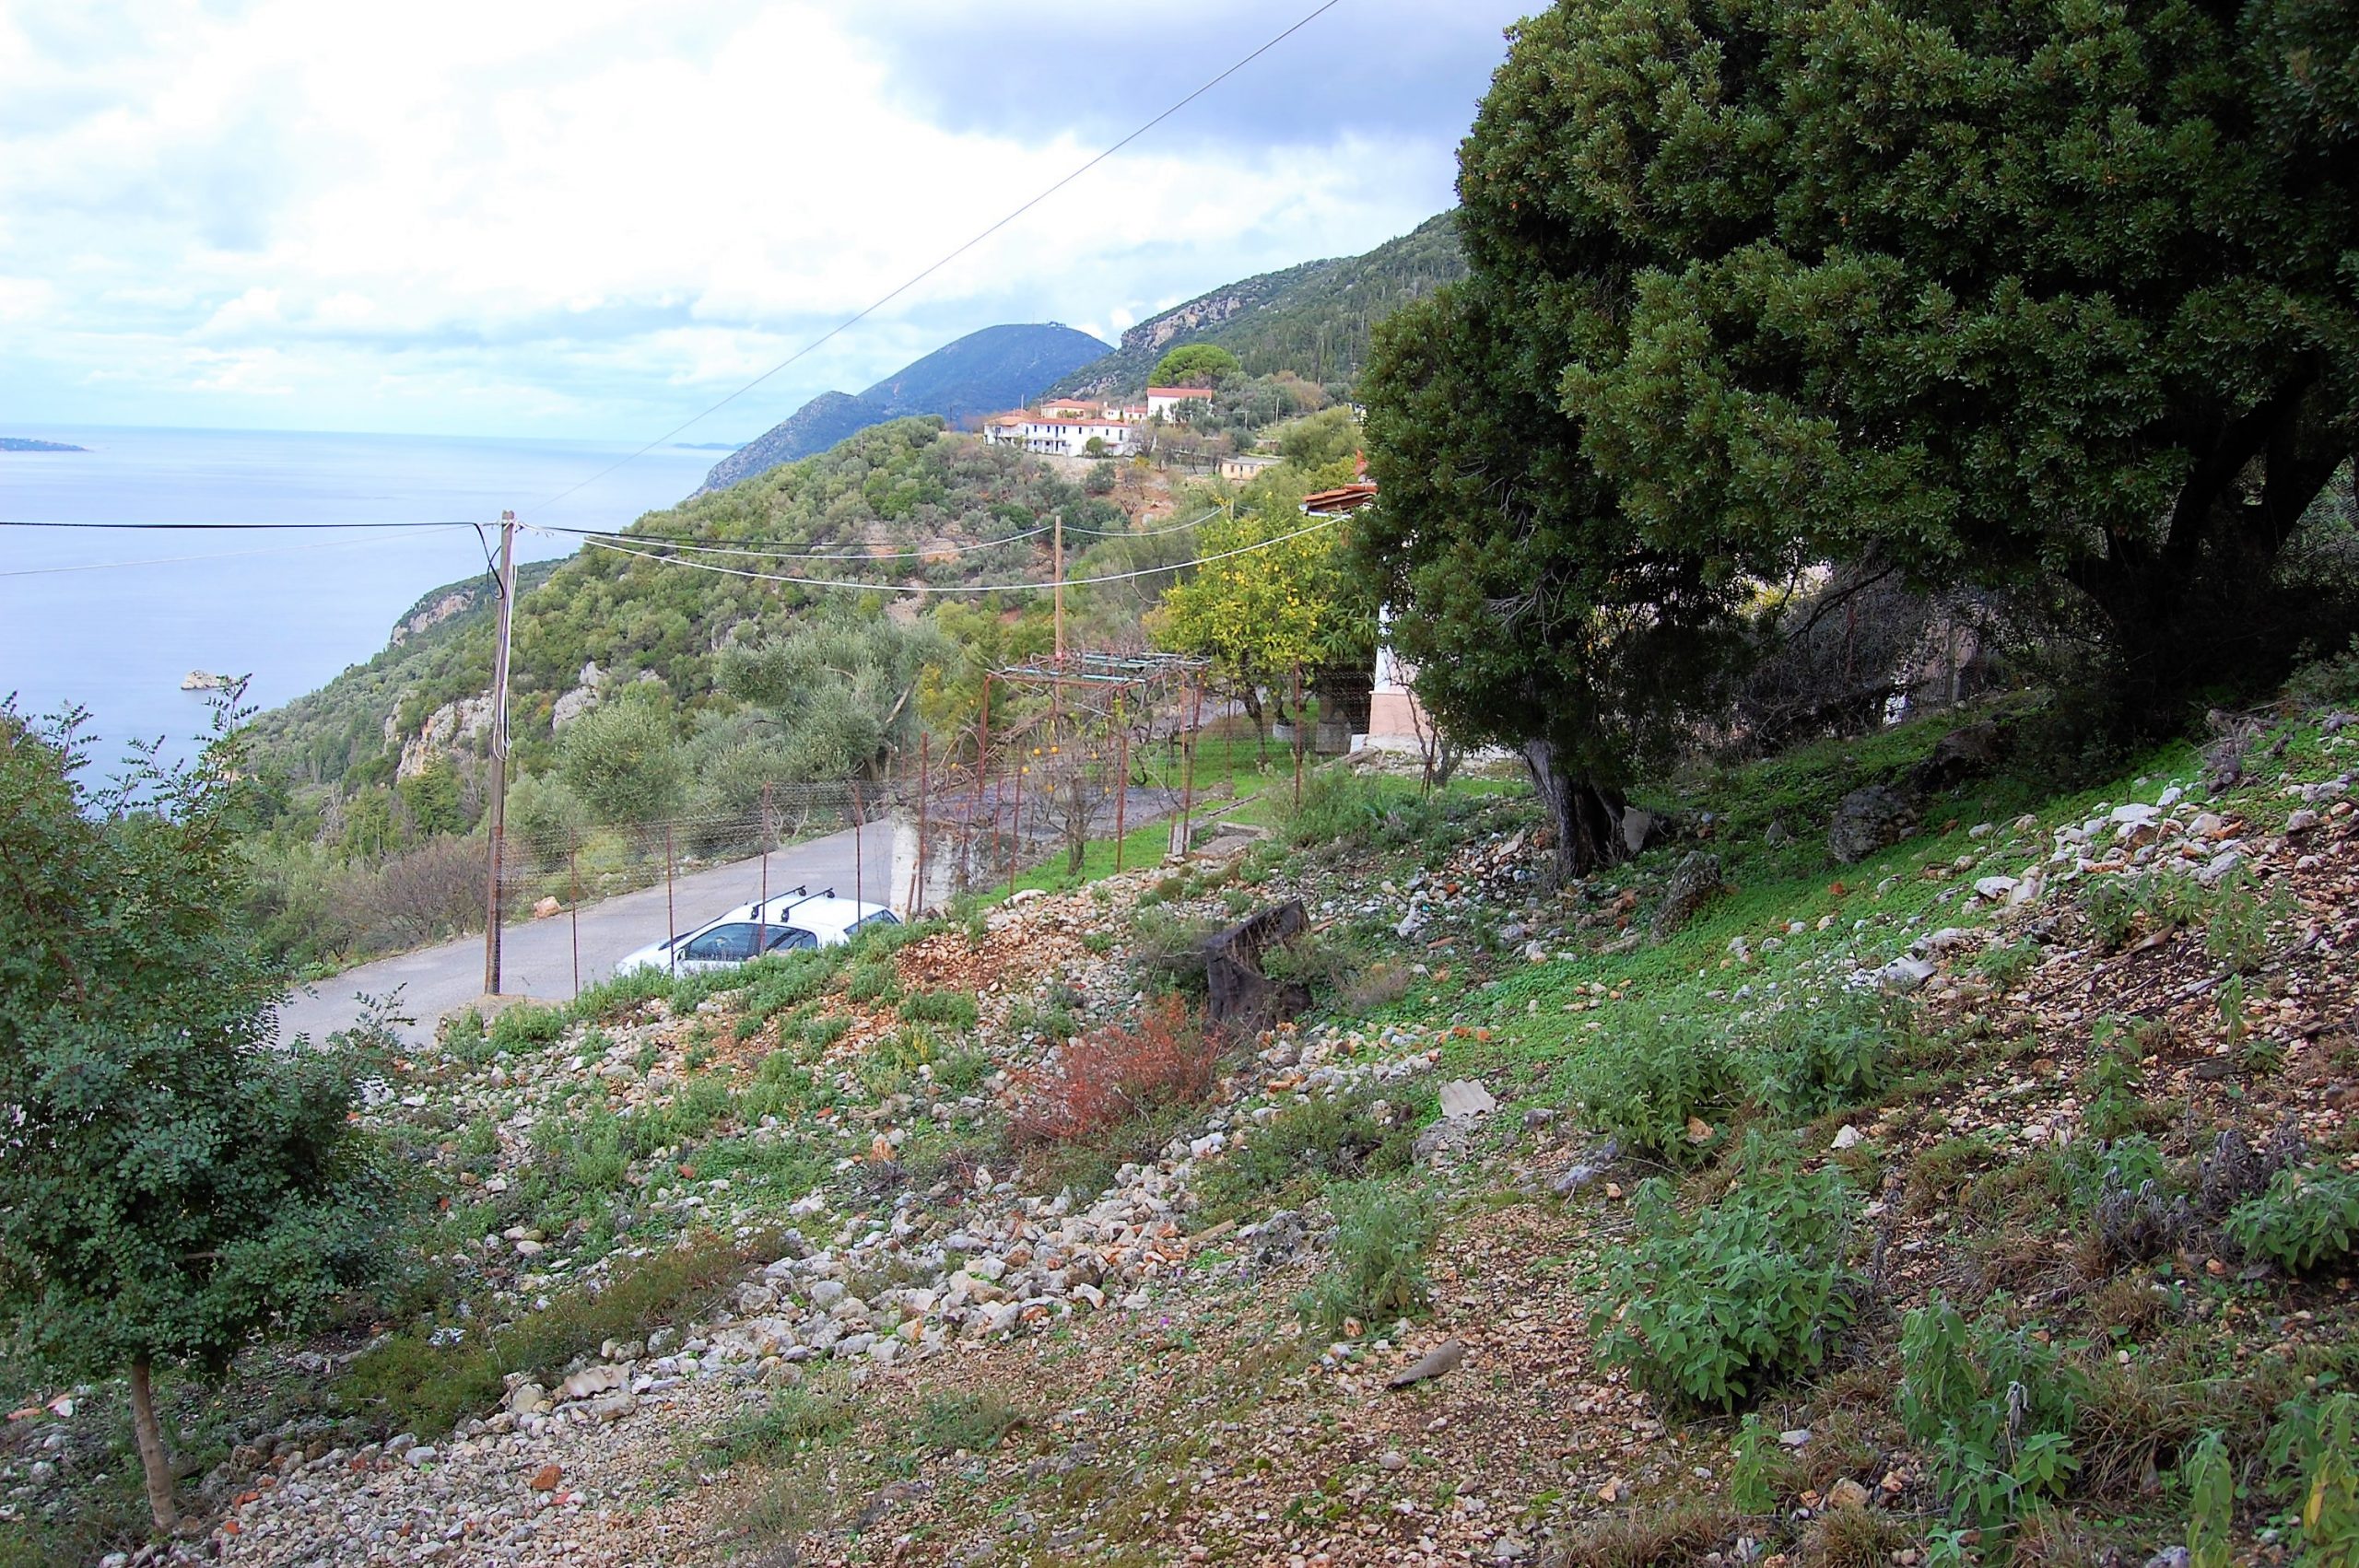 Terrain of property for sale on Ithaca Greece